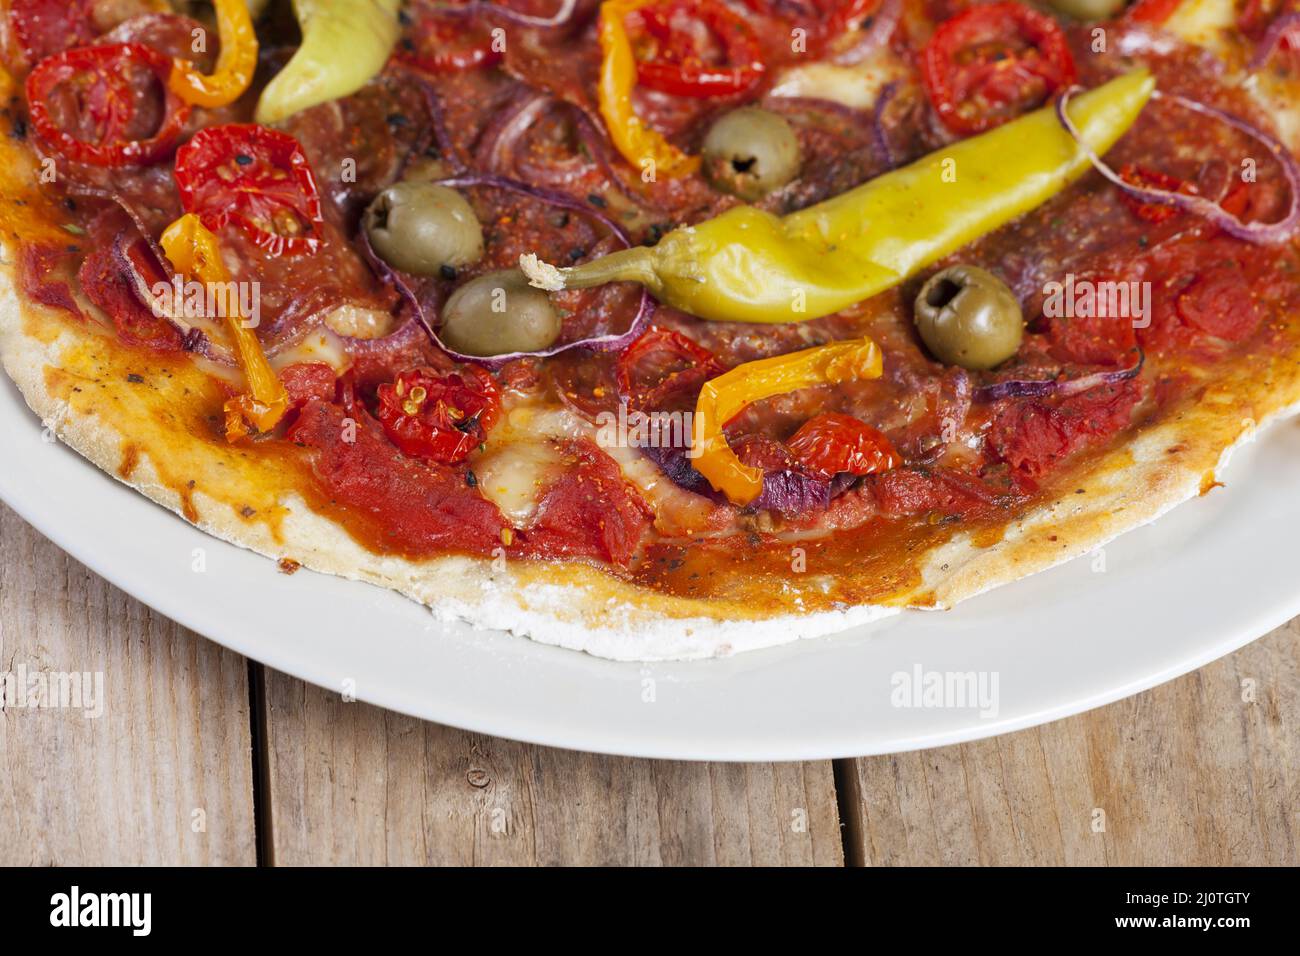 Detail of a pizza with pepperoni Stock Photo